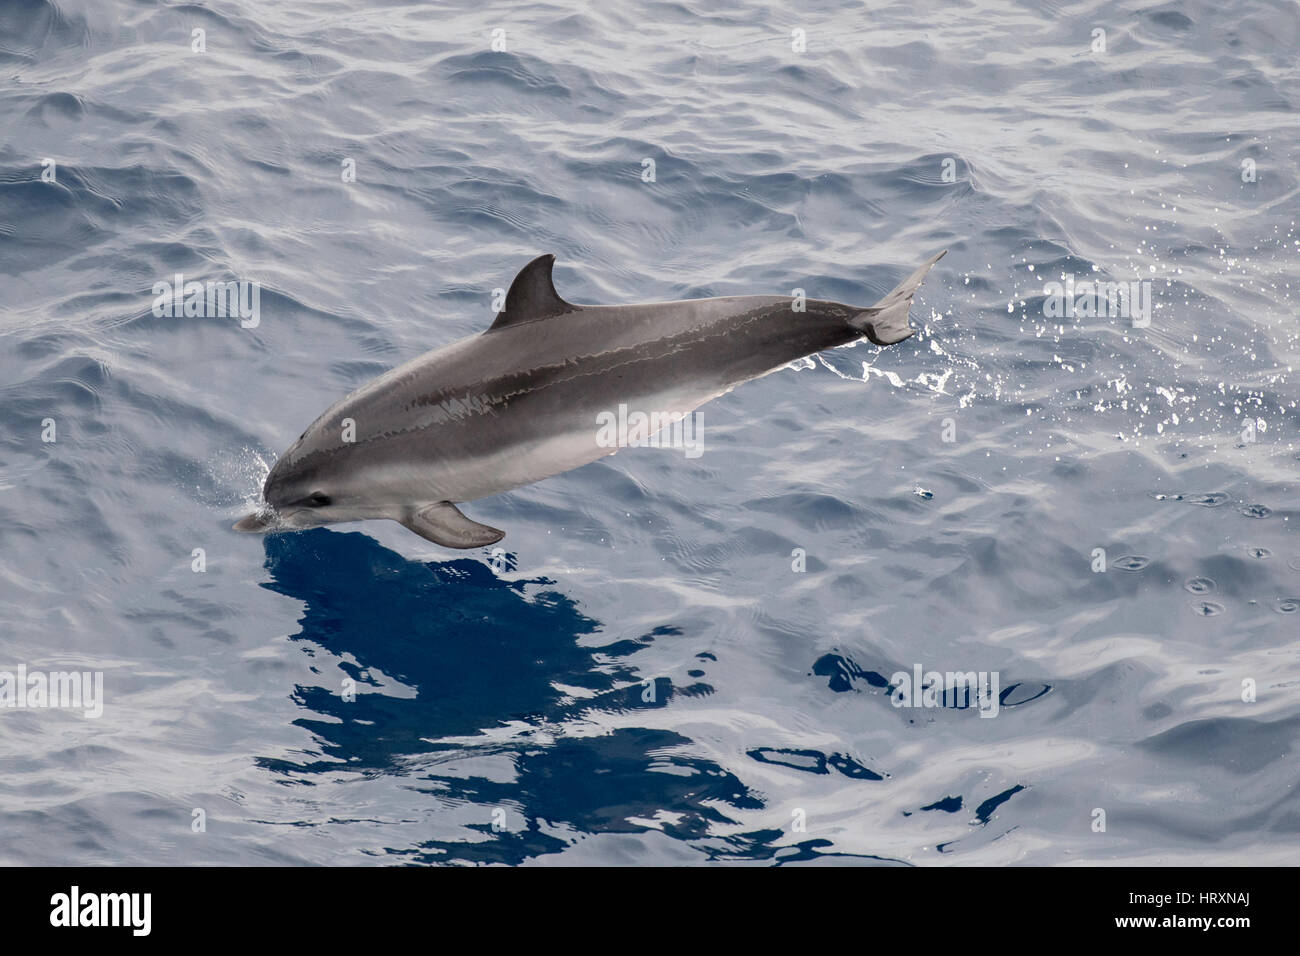 Juvenile Atlantic Spotted Dolphin, Stenella frontalis, breaching off Western Sahara, North Africa, Atlantic Ocean Stock Photo